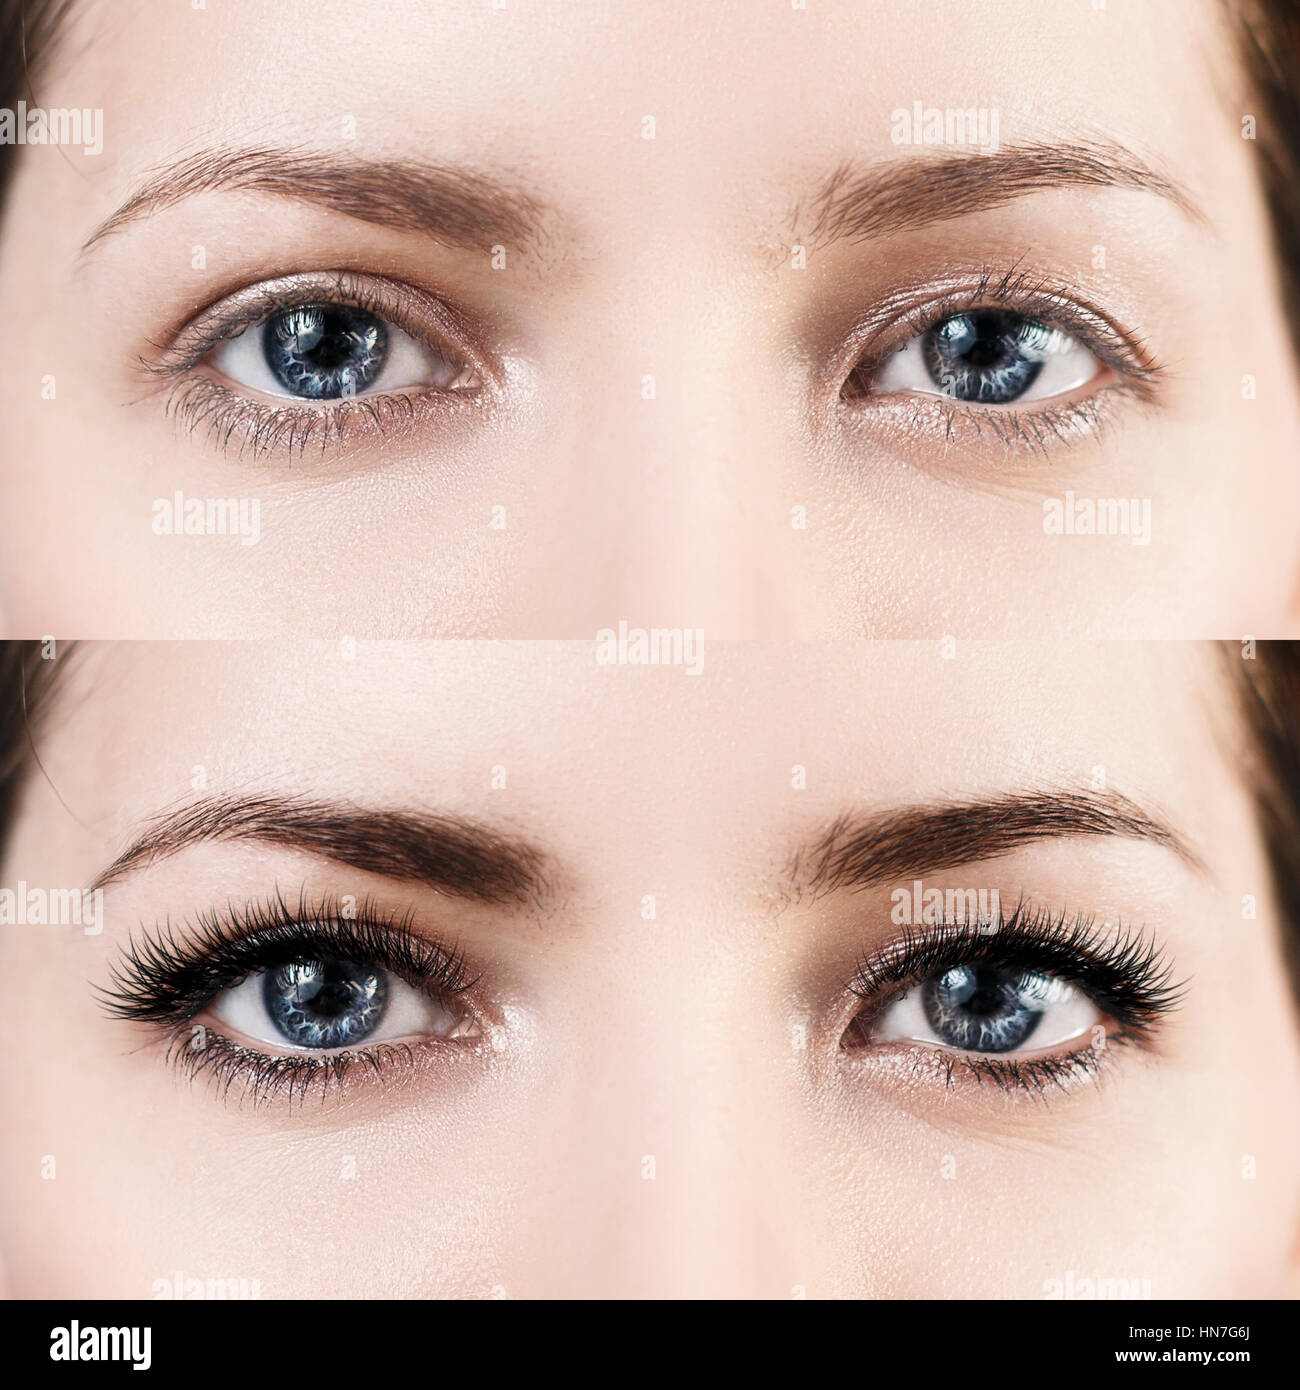 Female eyes before and after eyelash extension. Stock Photo